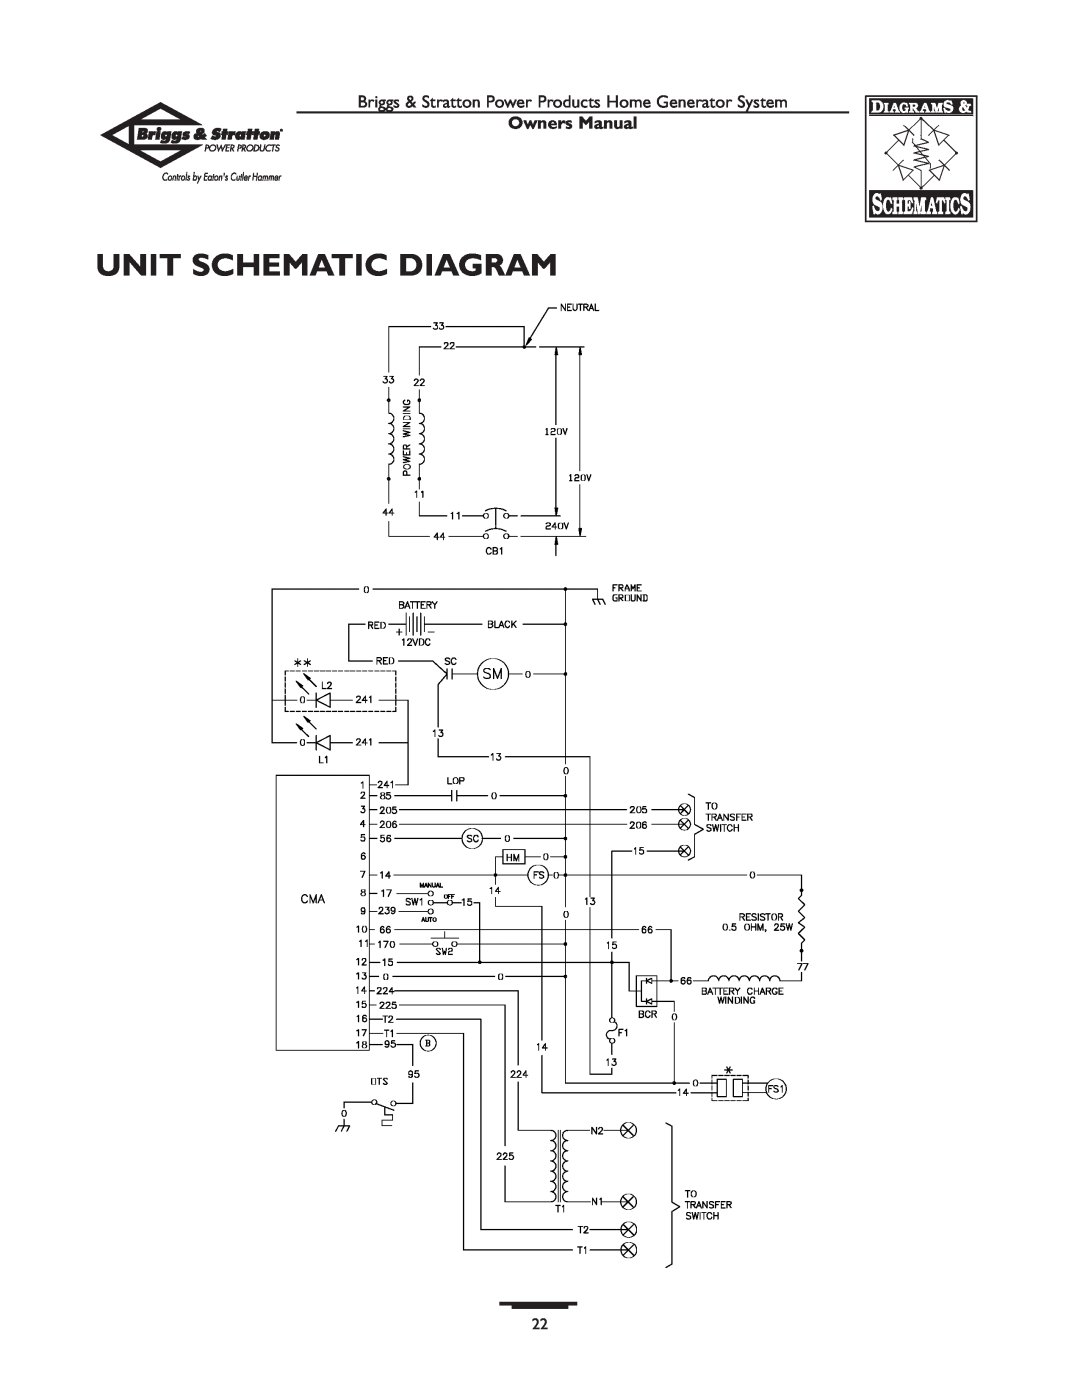 Briggs & Stratton 1679-0 owner manual Unit Schematic Diagram, Owners Manual 